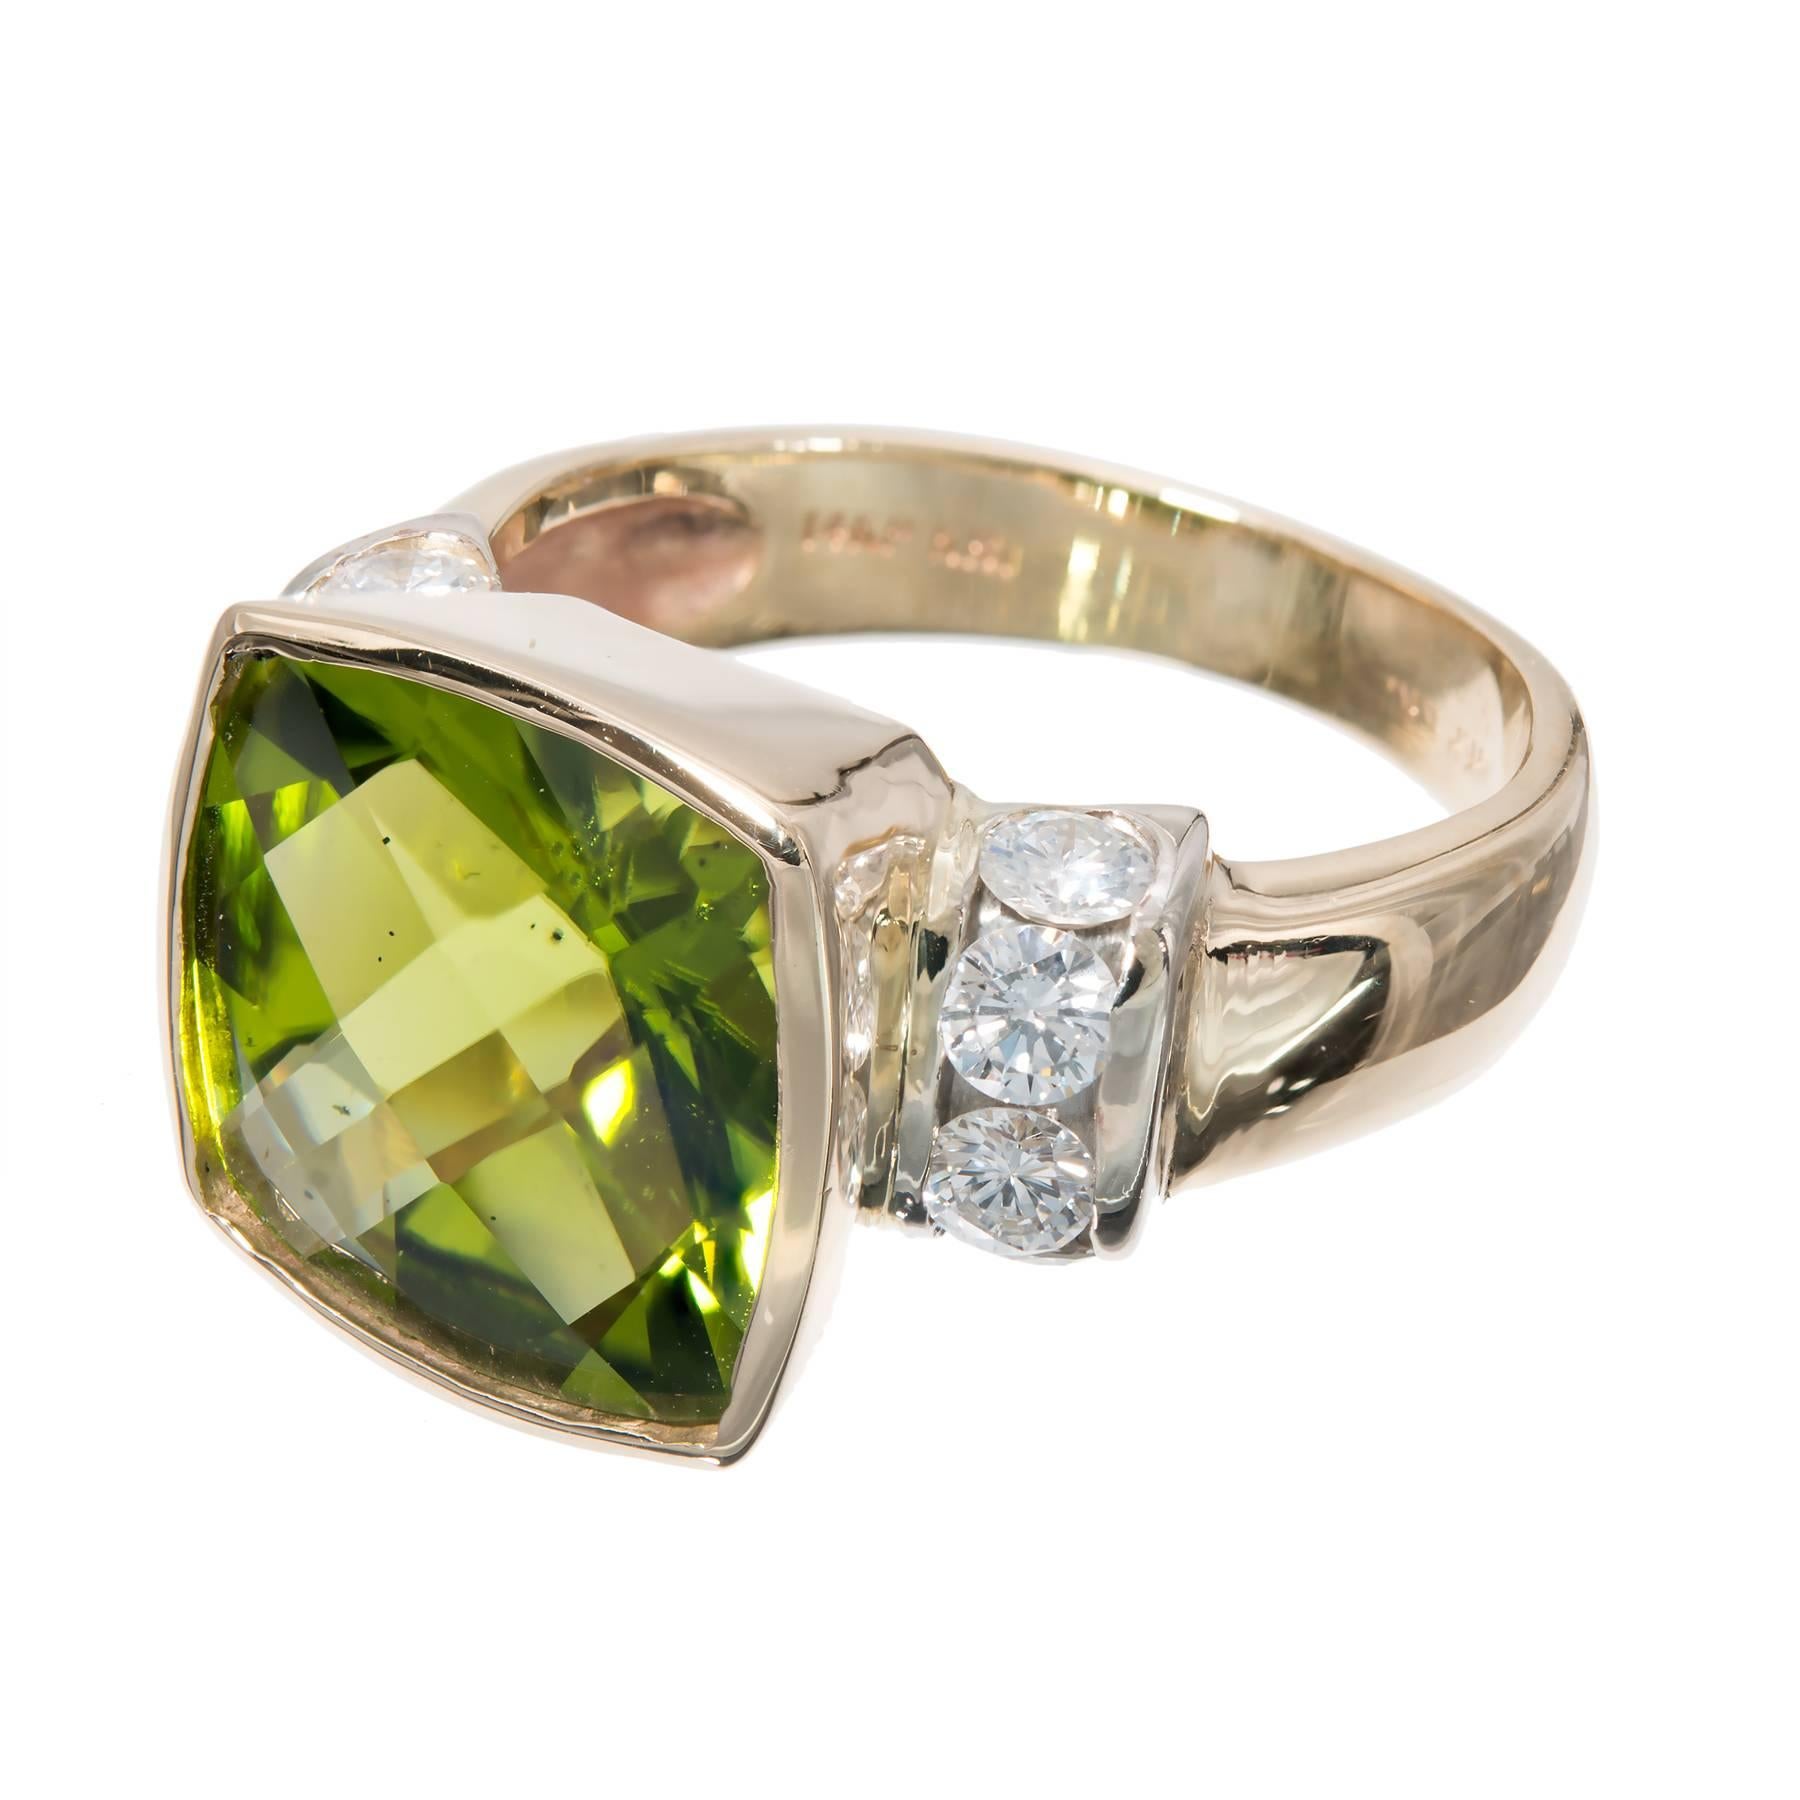 Fine rich bright green cushion Peridot in a full bezel and flanked by 8 round full cut diamonds. Yellow and white gold setting. 

1 square custom fine rich green Peridot, approx. total weight 6.62cts
8 round full cut diamonds, approx. total